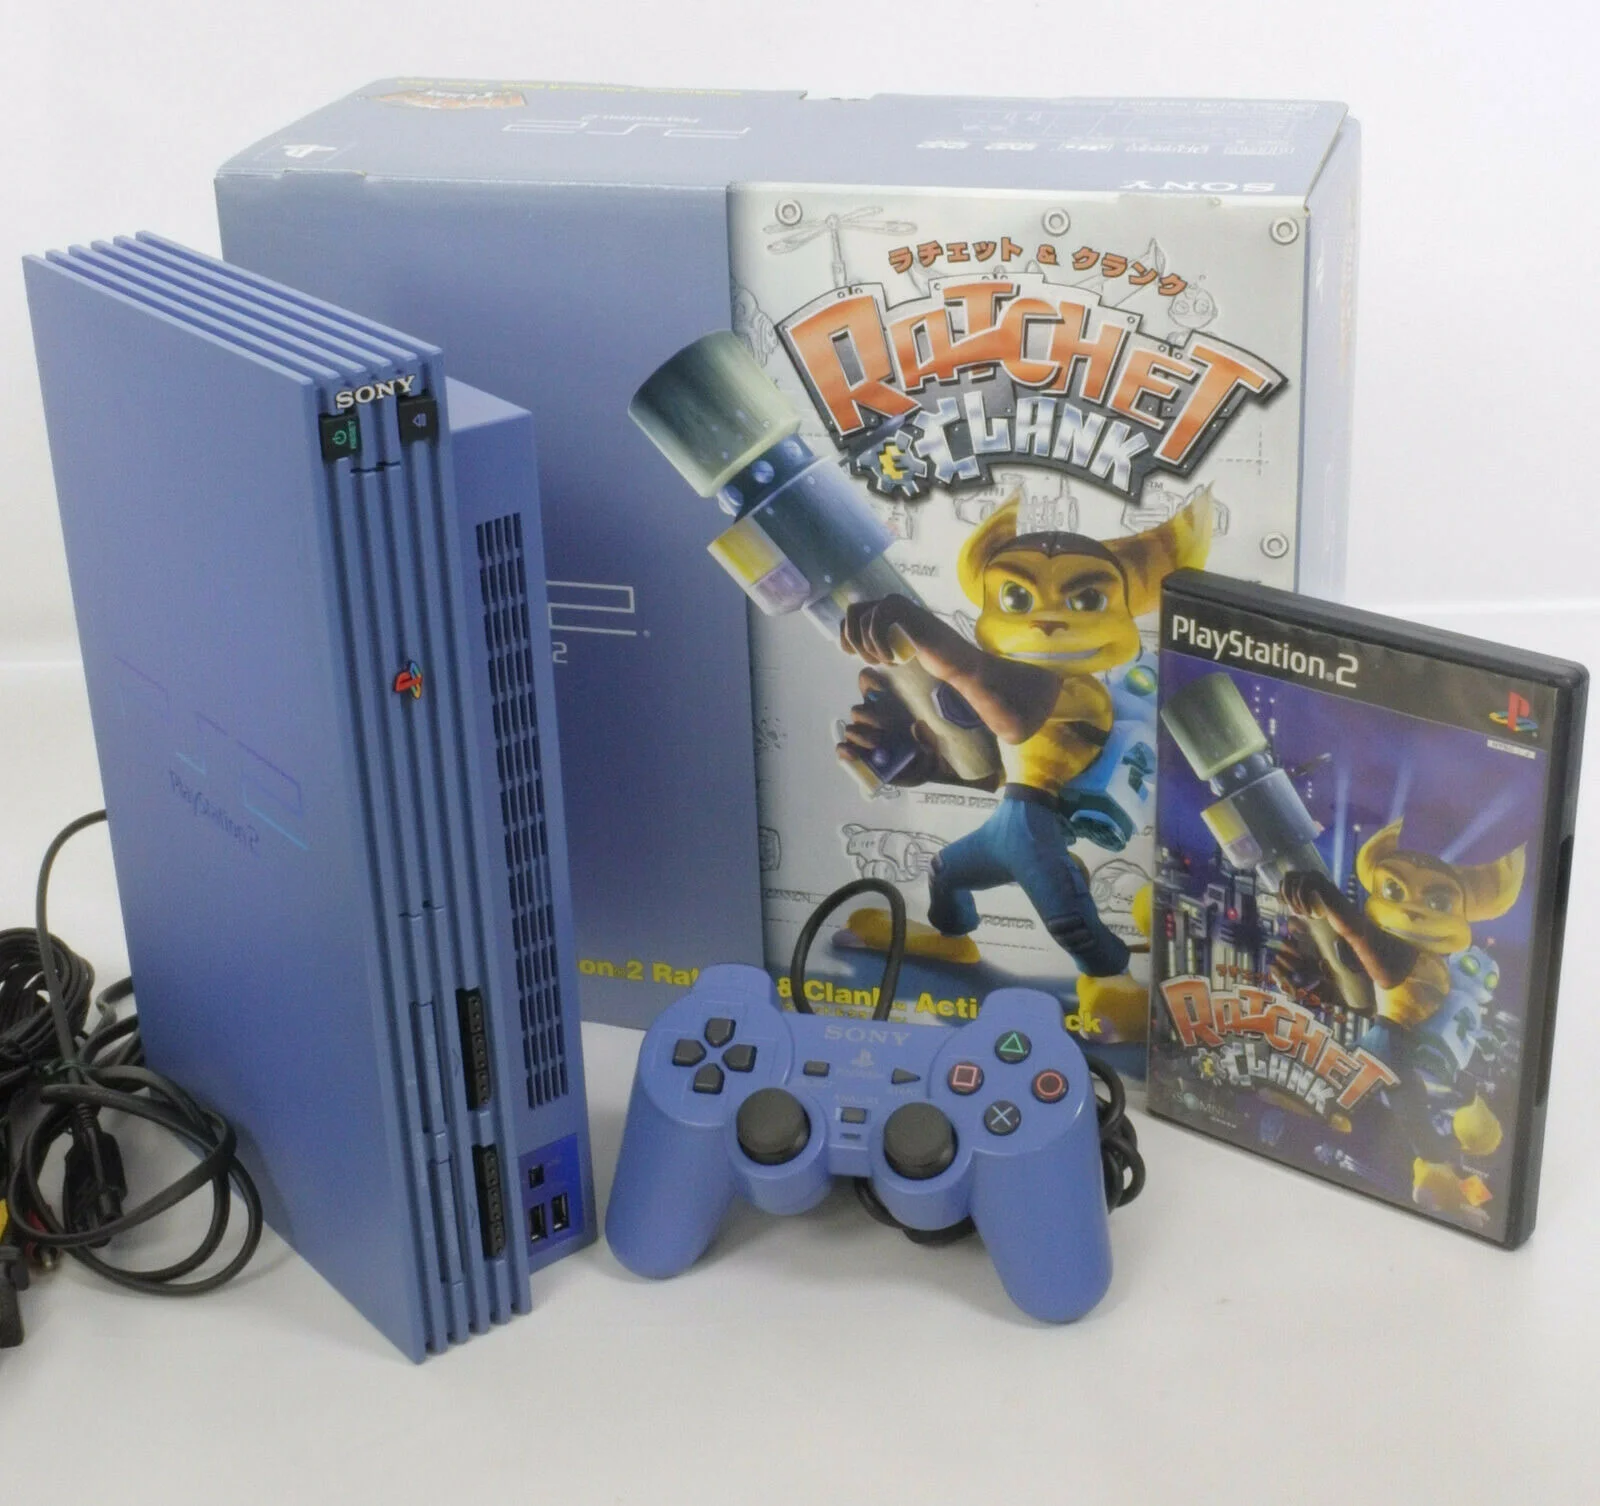  Sony Playstation 2 Ratchet and Clank Bundle